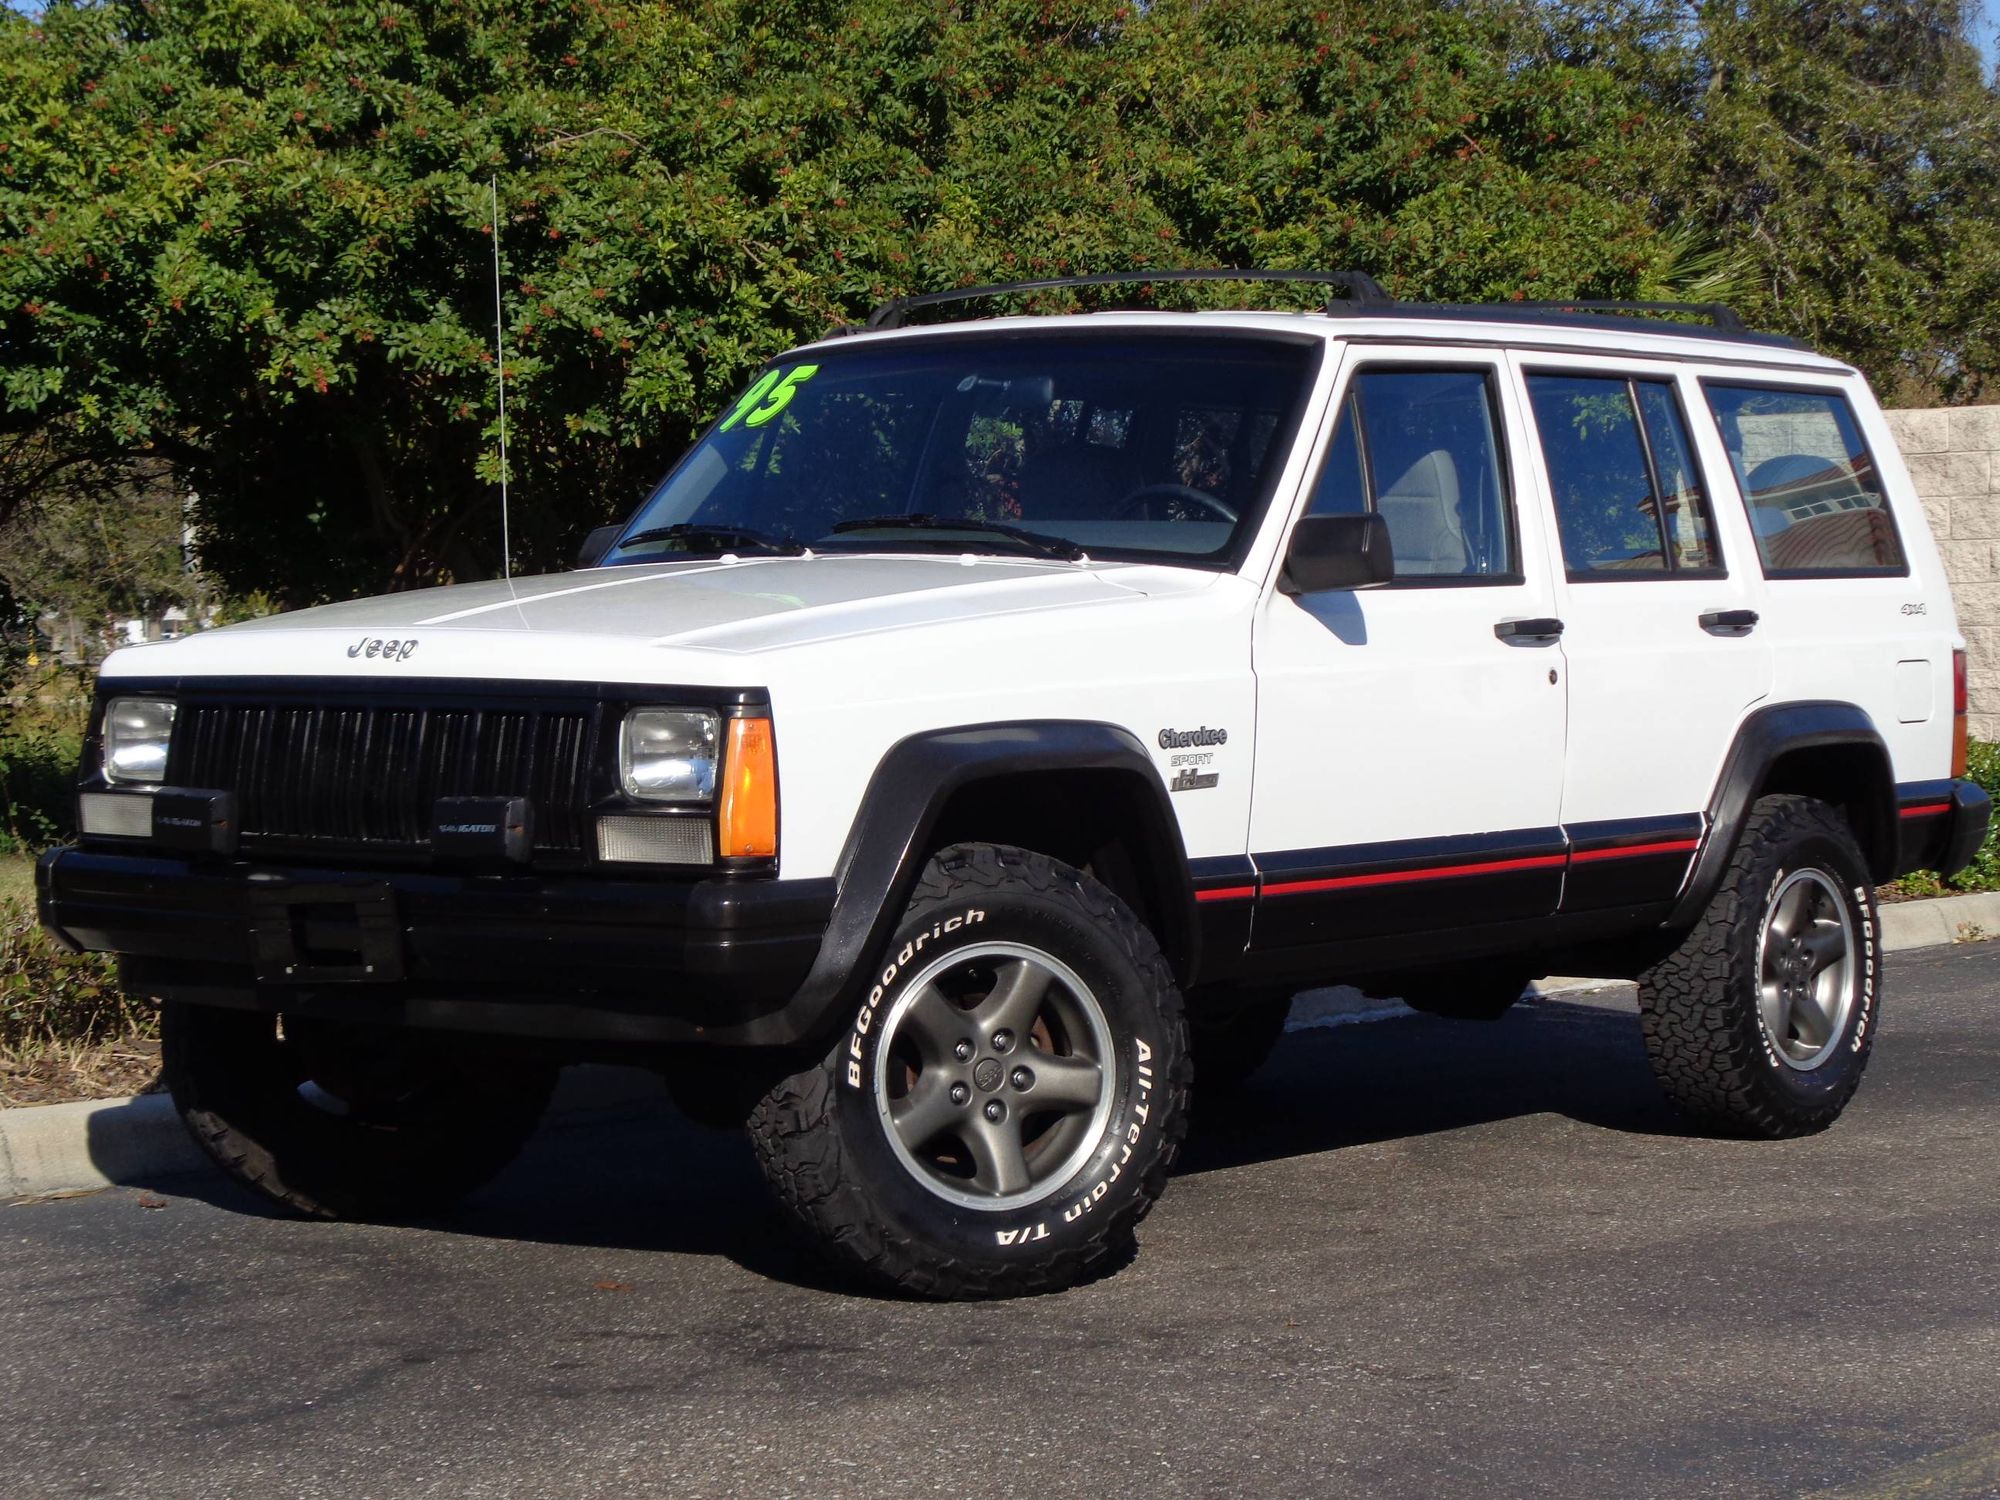 90s Jeep: Adventure and Style on Four Wheels